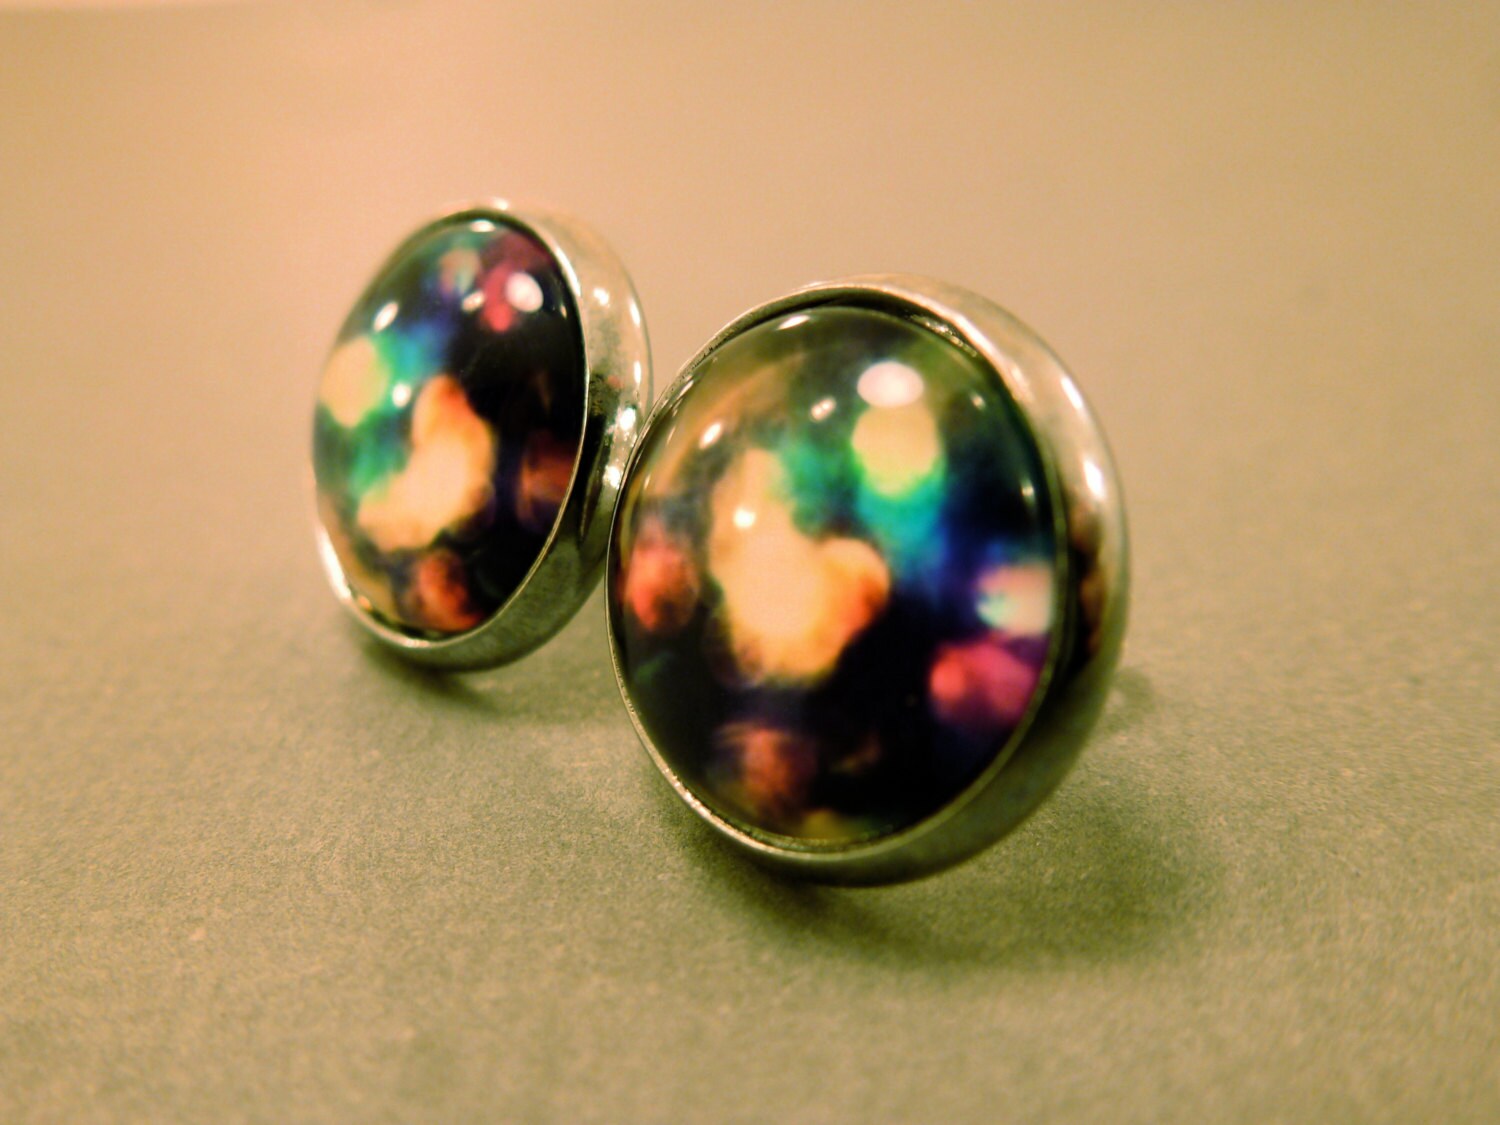 Galaxy Stud Earrings: Colour Burst Galaxy Stud by CraftsbyBrittany